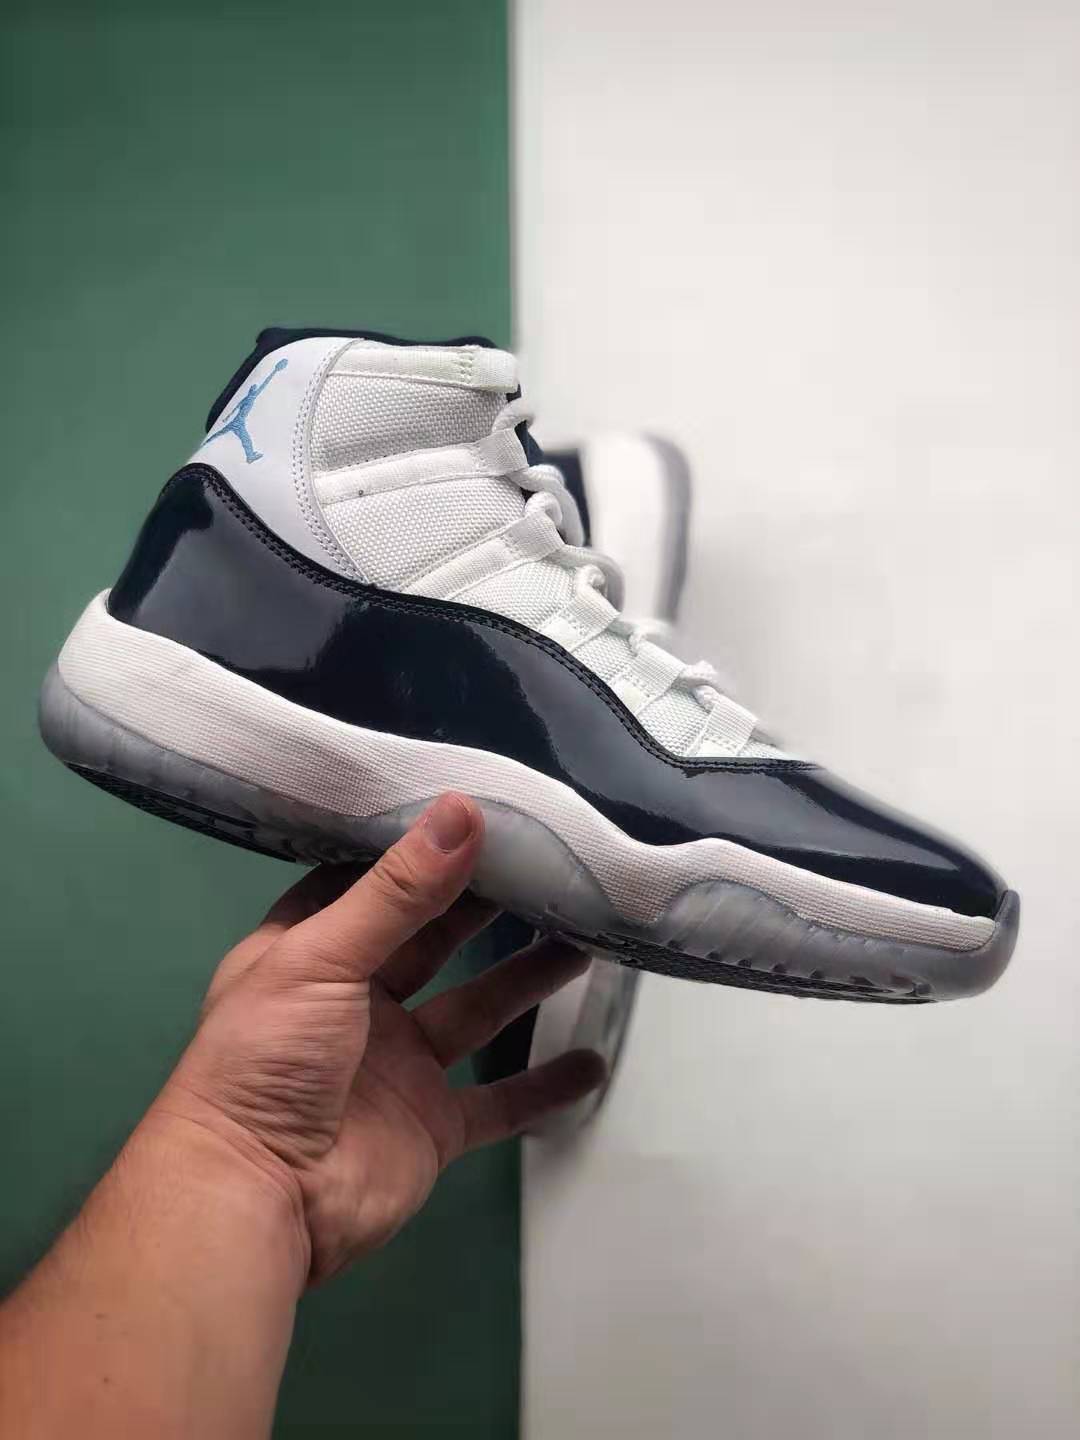 Air Jordan 11 Retro 'Win Like 82' 378037-123: Authentic Classic Sneakers for Basketball Enthusiasts